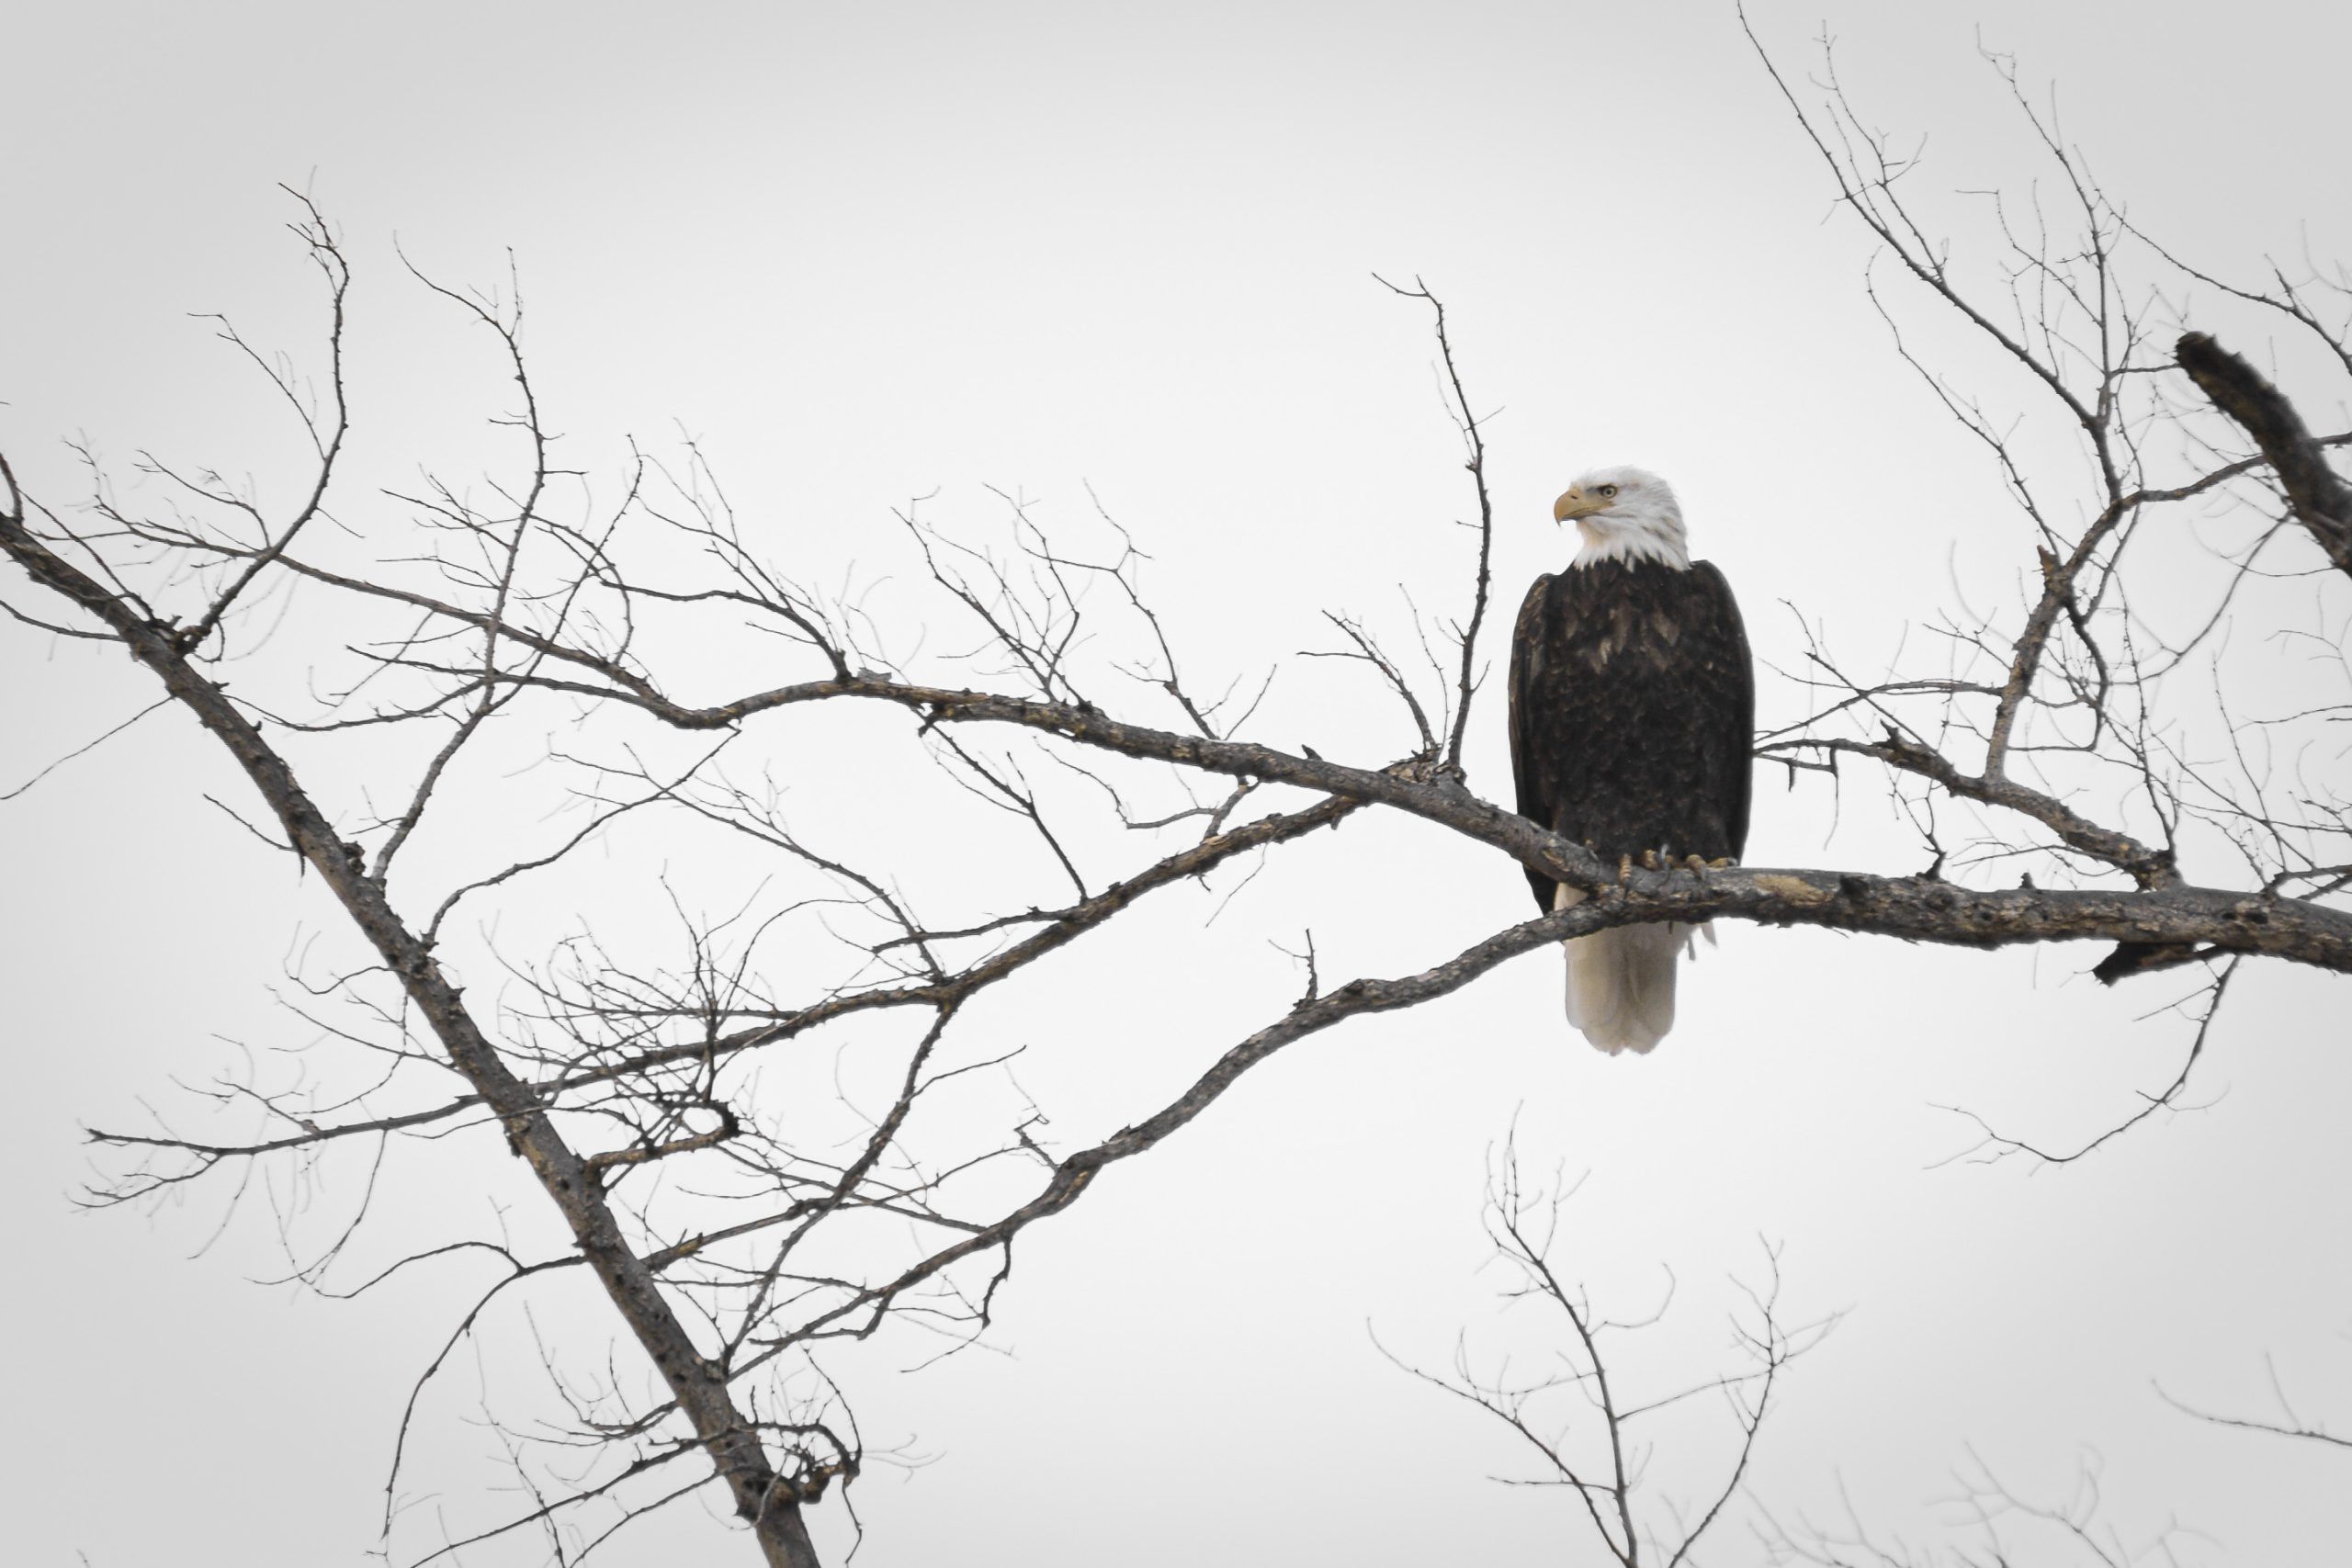 A bald eagle sits on a tree branch